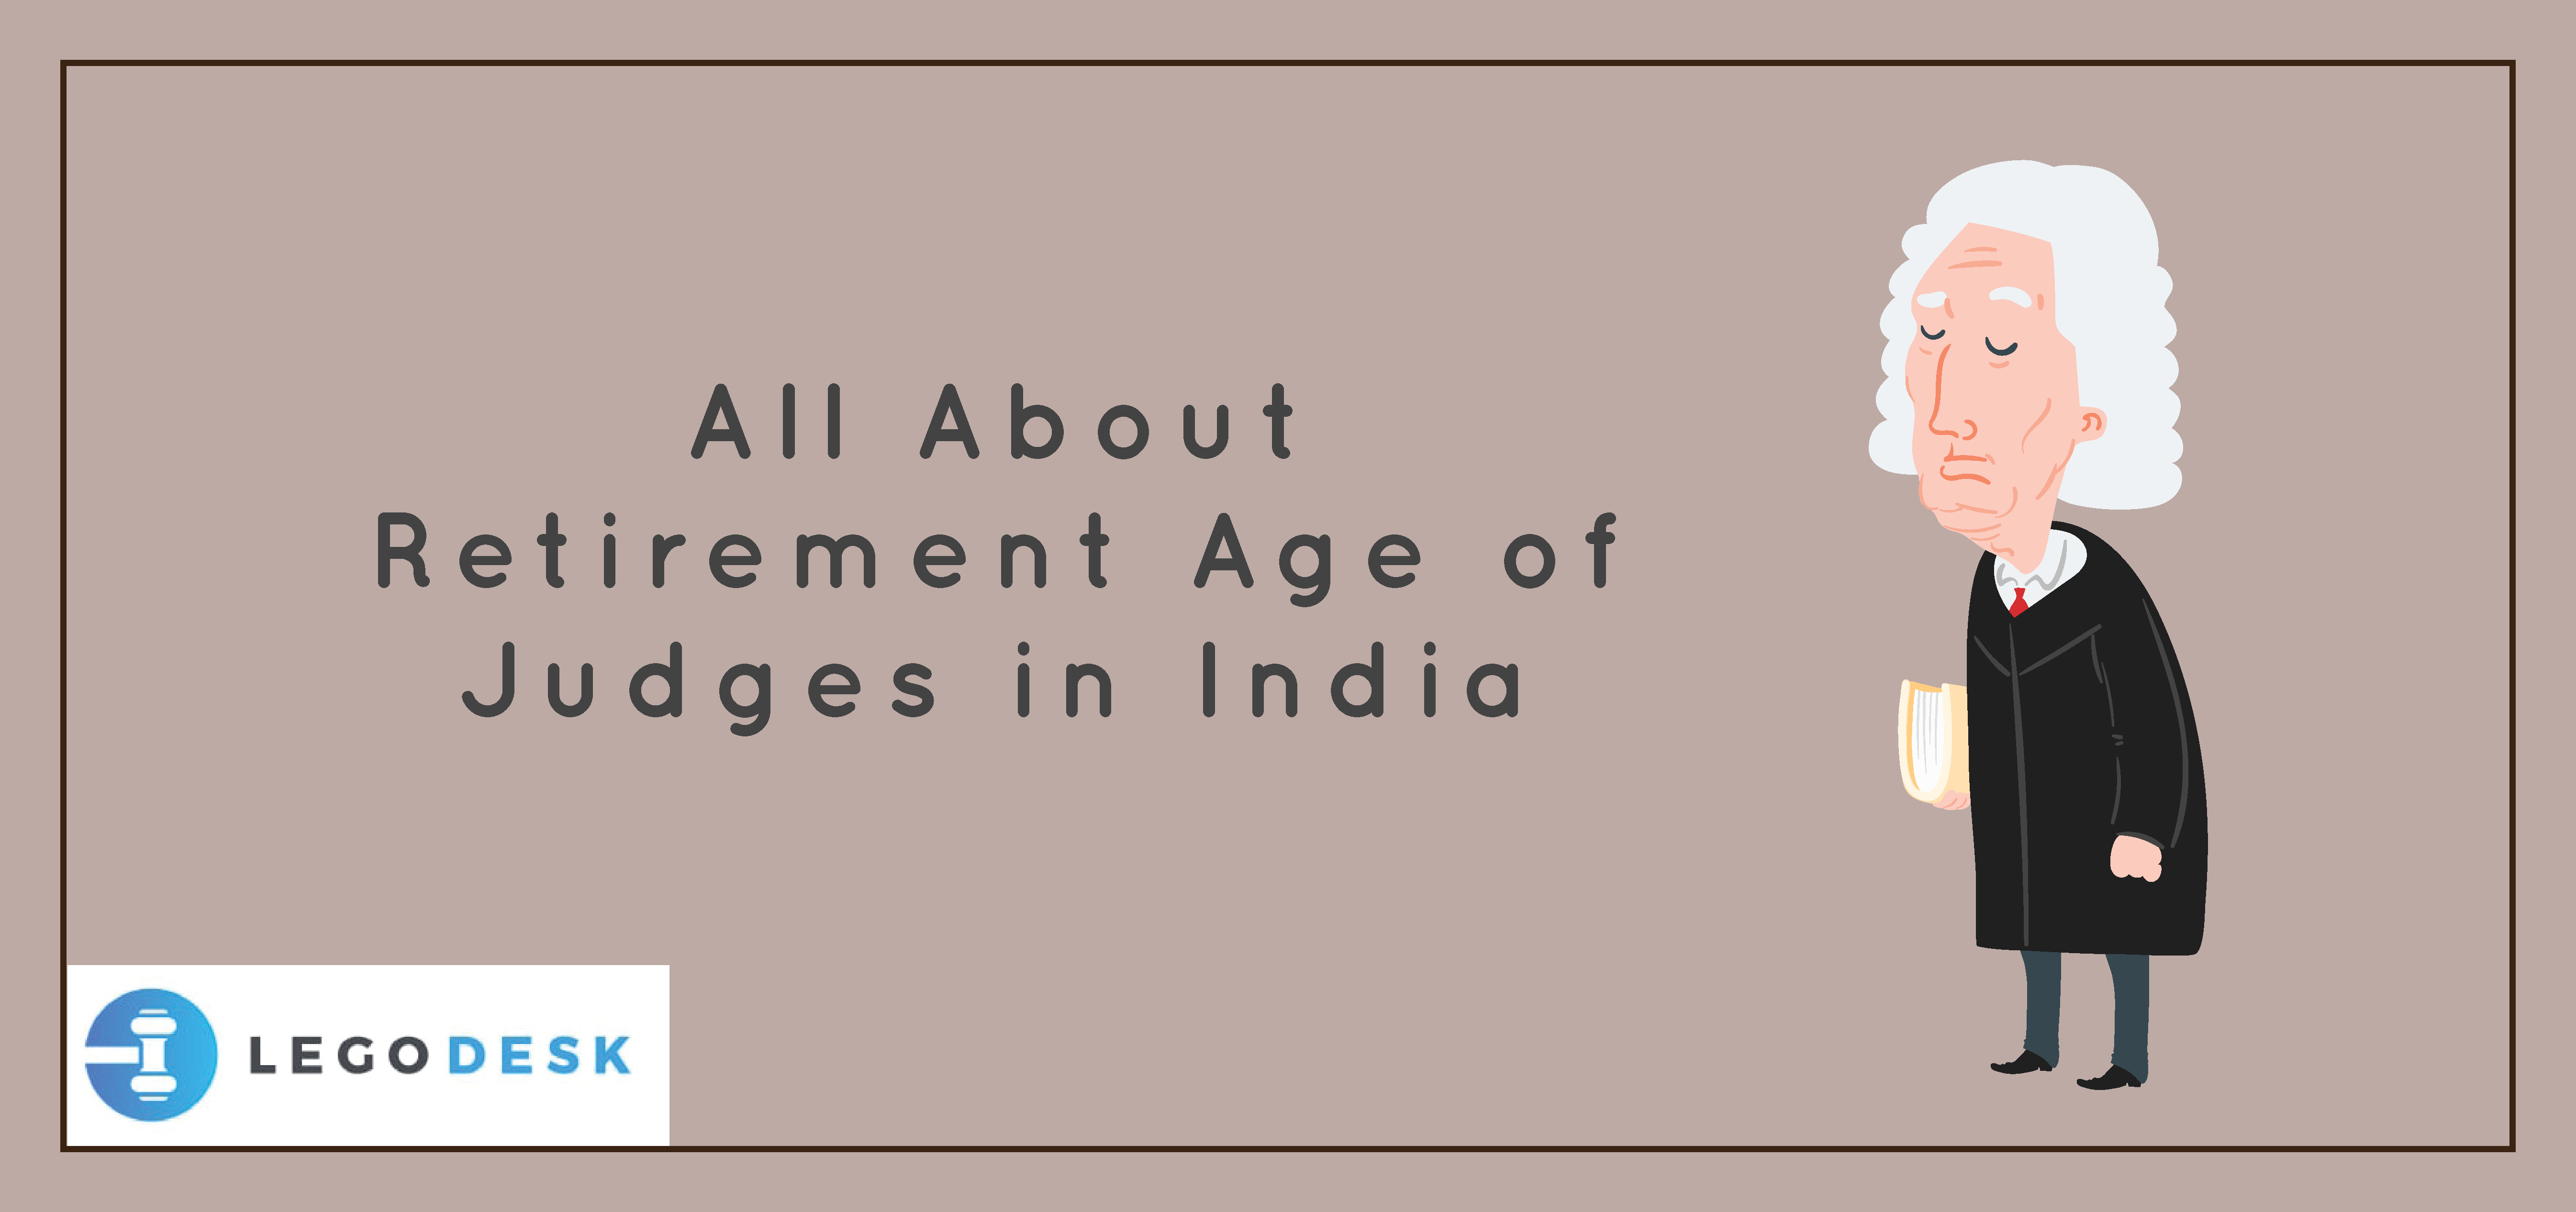 All About Retirement Age of Judges in India